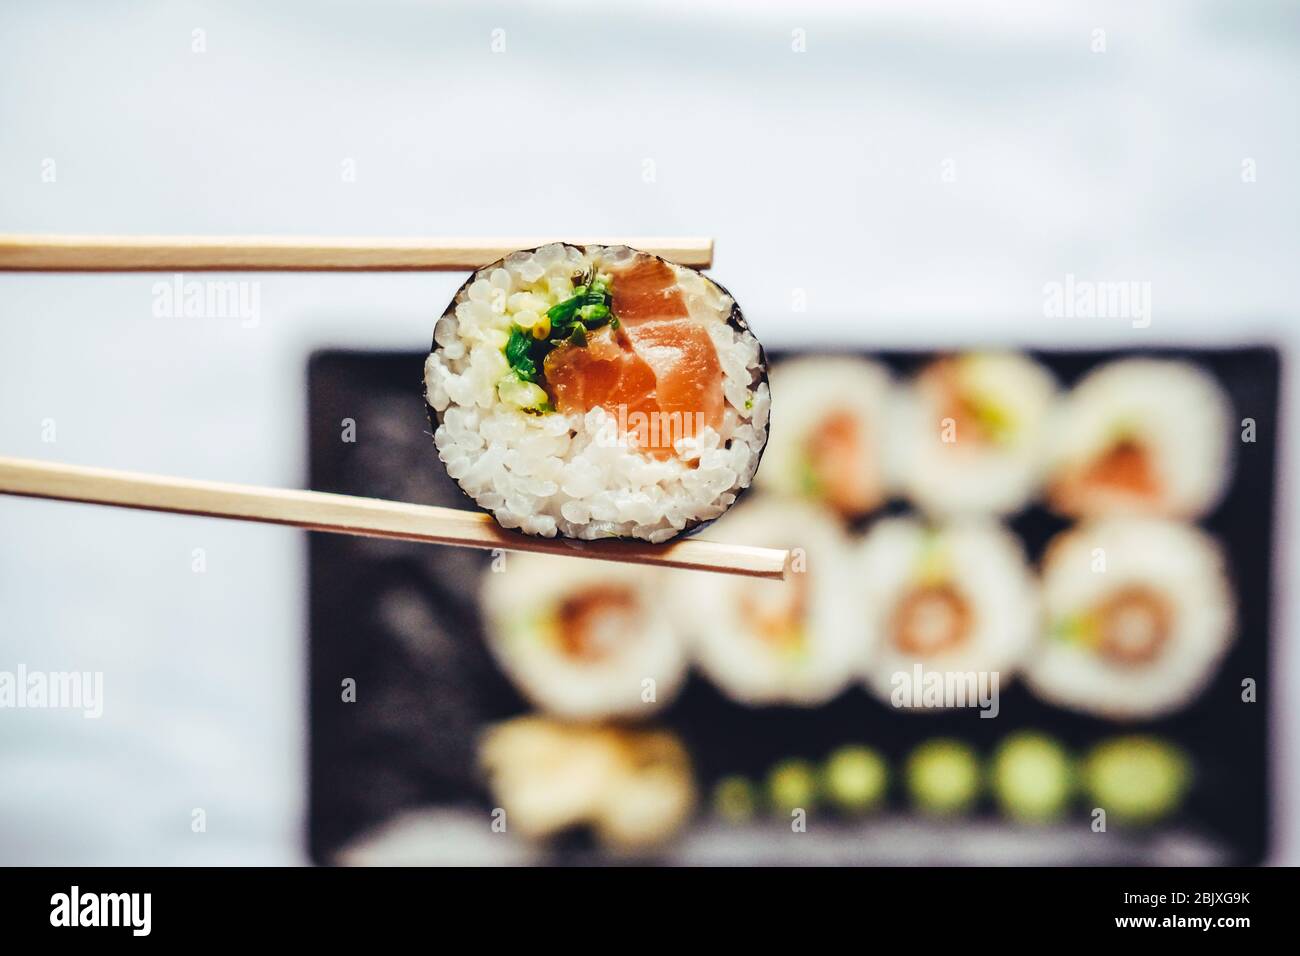 Closeup of chopsticks holding sushi infront of more sushi on a black plate over white background Stock Photo